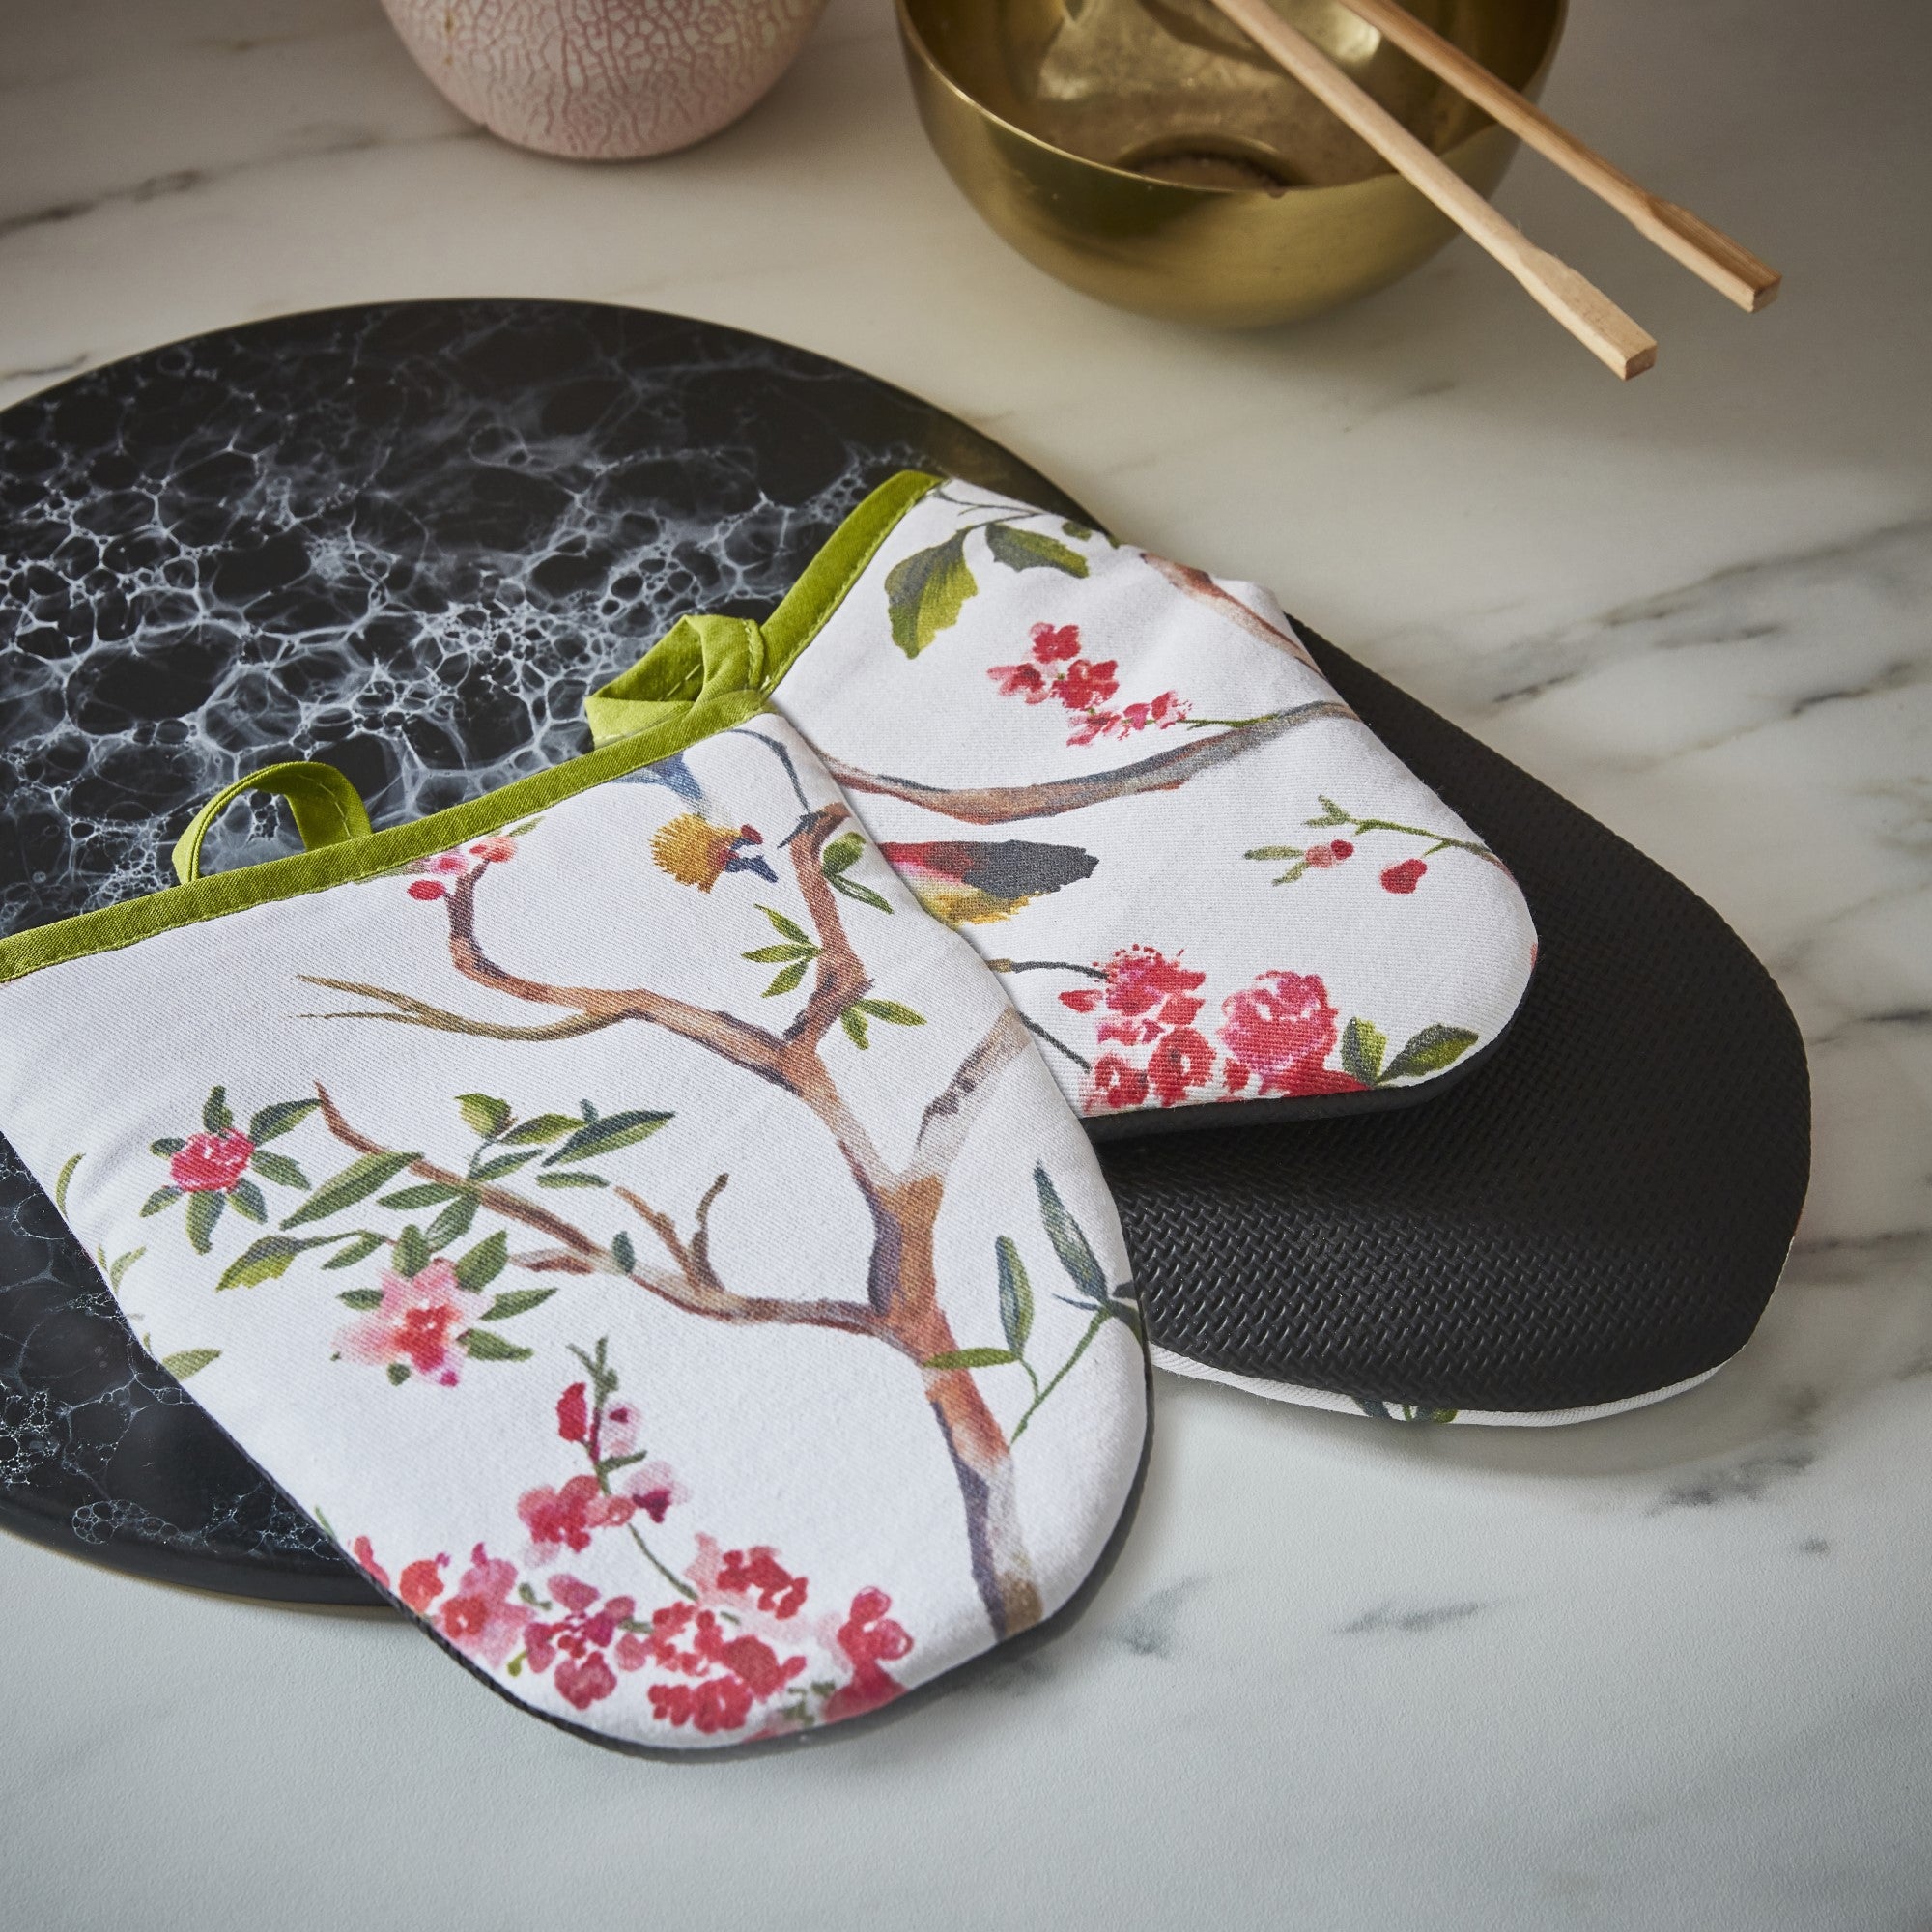 Ulster Weavers Microwave Mitts - Oriental Birds (100% Cotton Outer with Neoprene Sleeve) - Micro Mitts - Ulster Weavers